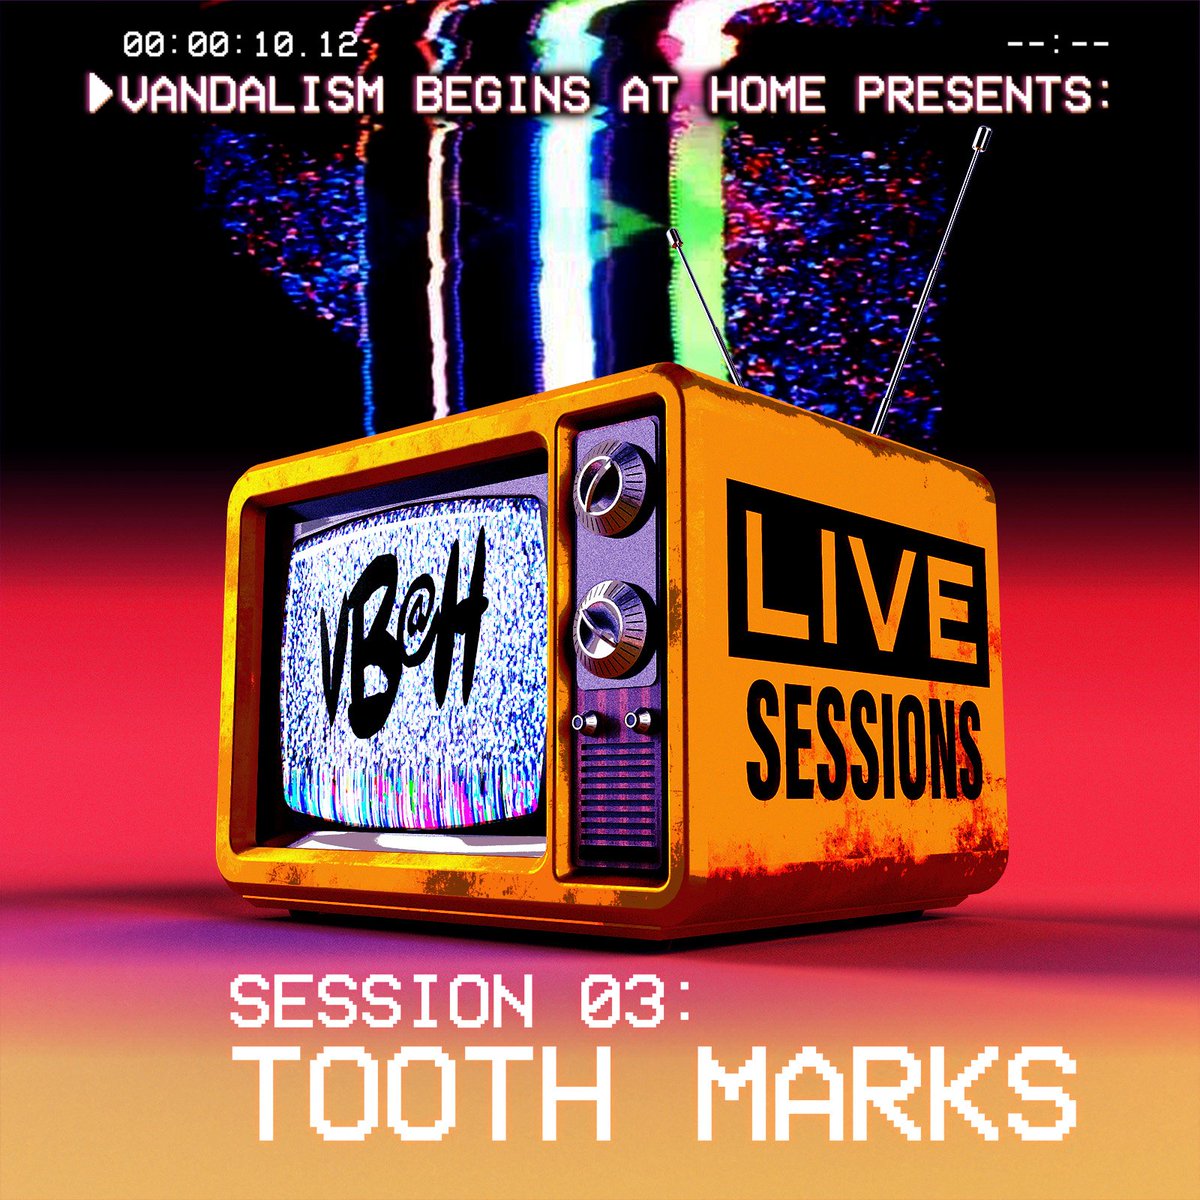 Who's ready for another VB@H Live Session coming at you from @TheCastleLive? We had the pleasure of @toothmarksmusic bringing their unique blend of anthemic alt-rock & we can testify you'll want to bite into this one because it is tasty! 6PM at VBAH.co.uk & YouTube